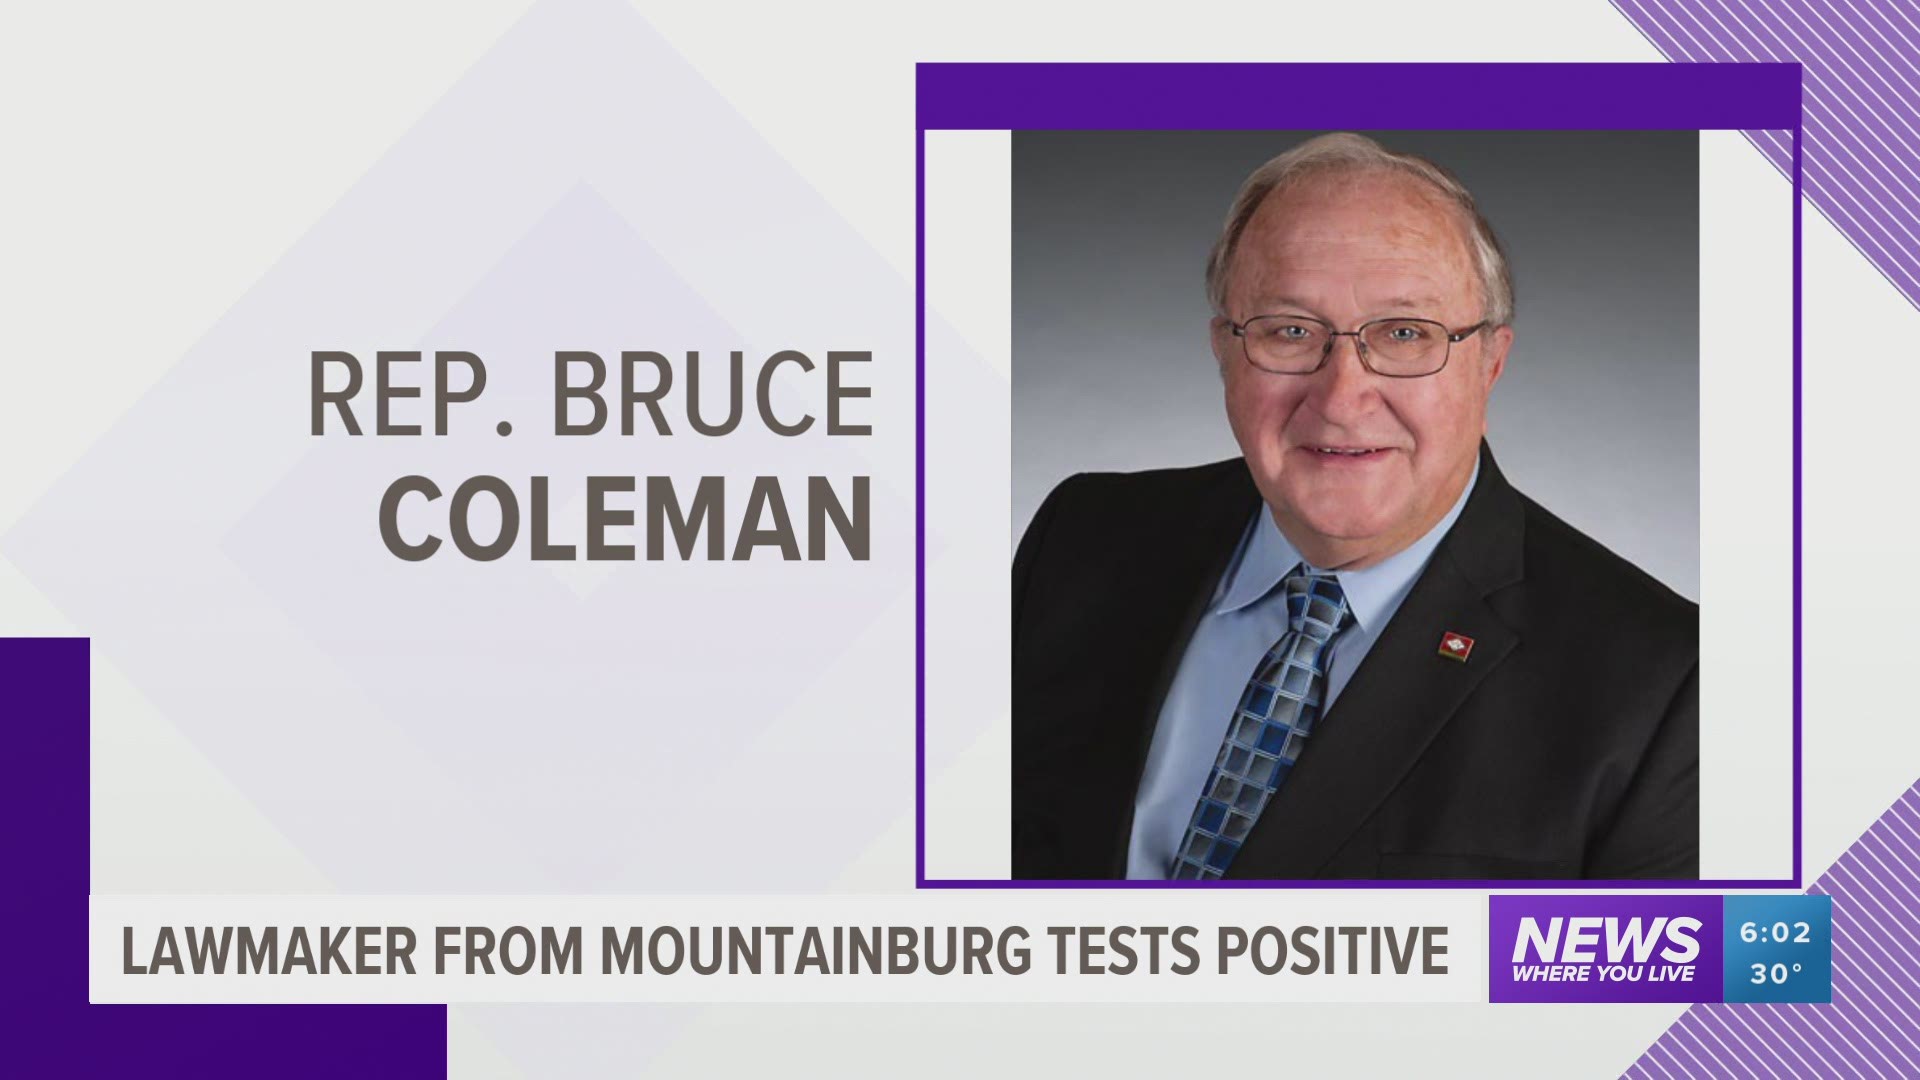 Lawmaker from Mountainburg tests positive for COVID-19